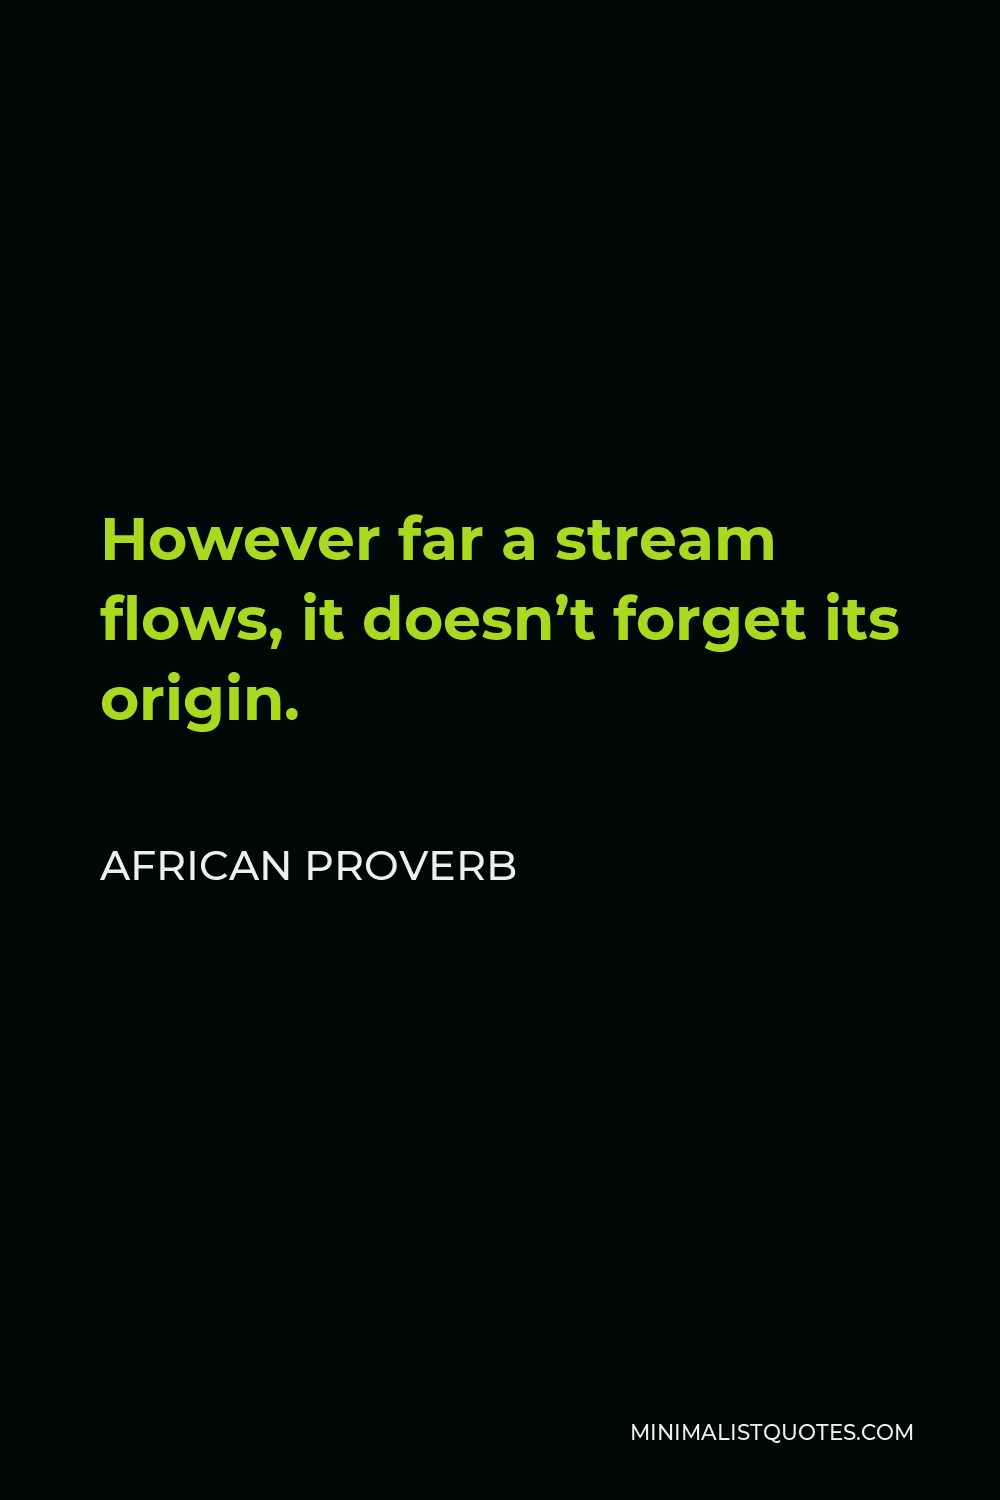 African Proverb Quote - However far a stream flows, it doesn’t forget its origin.